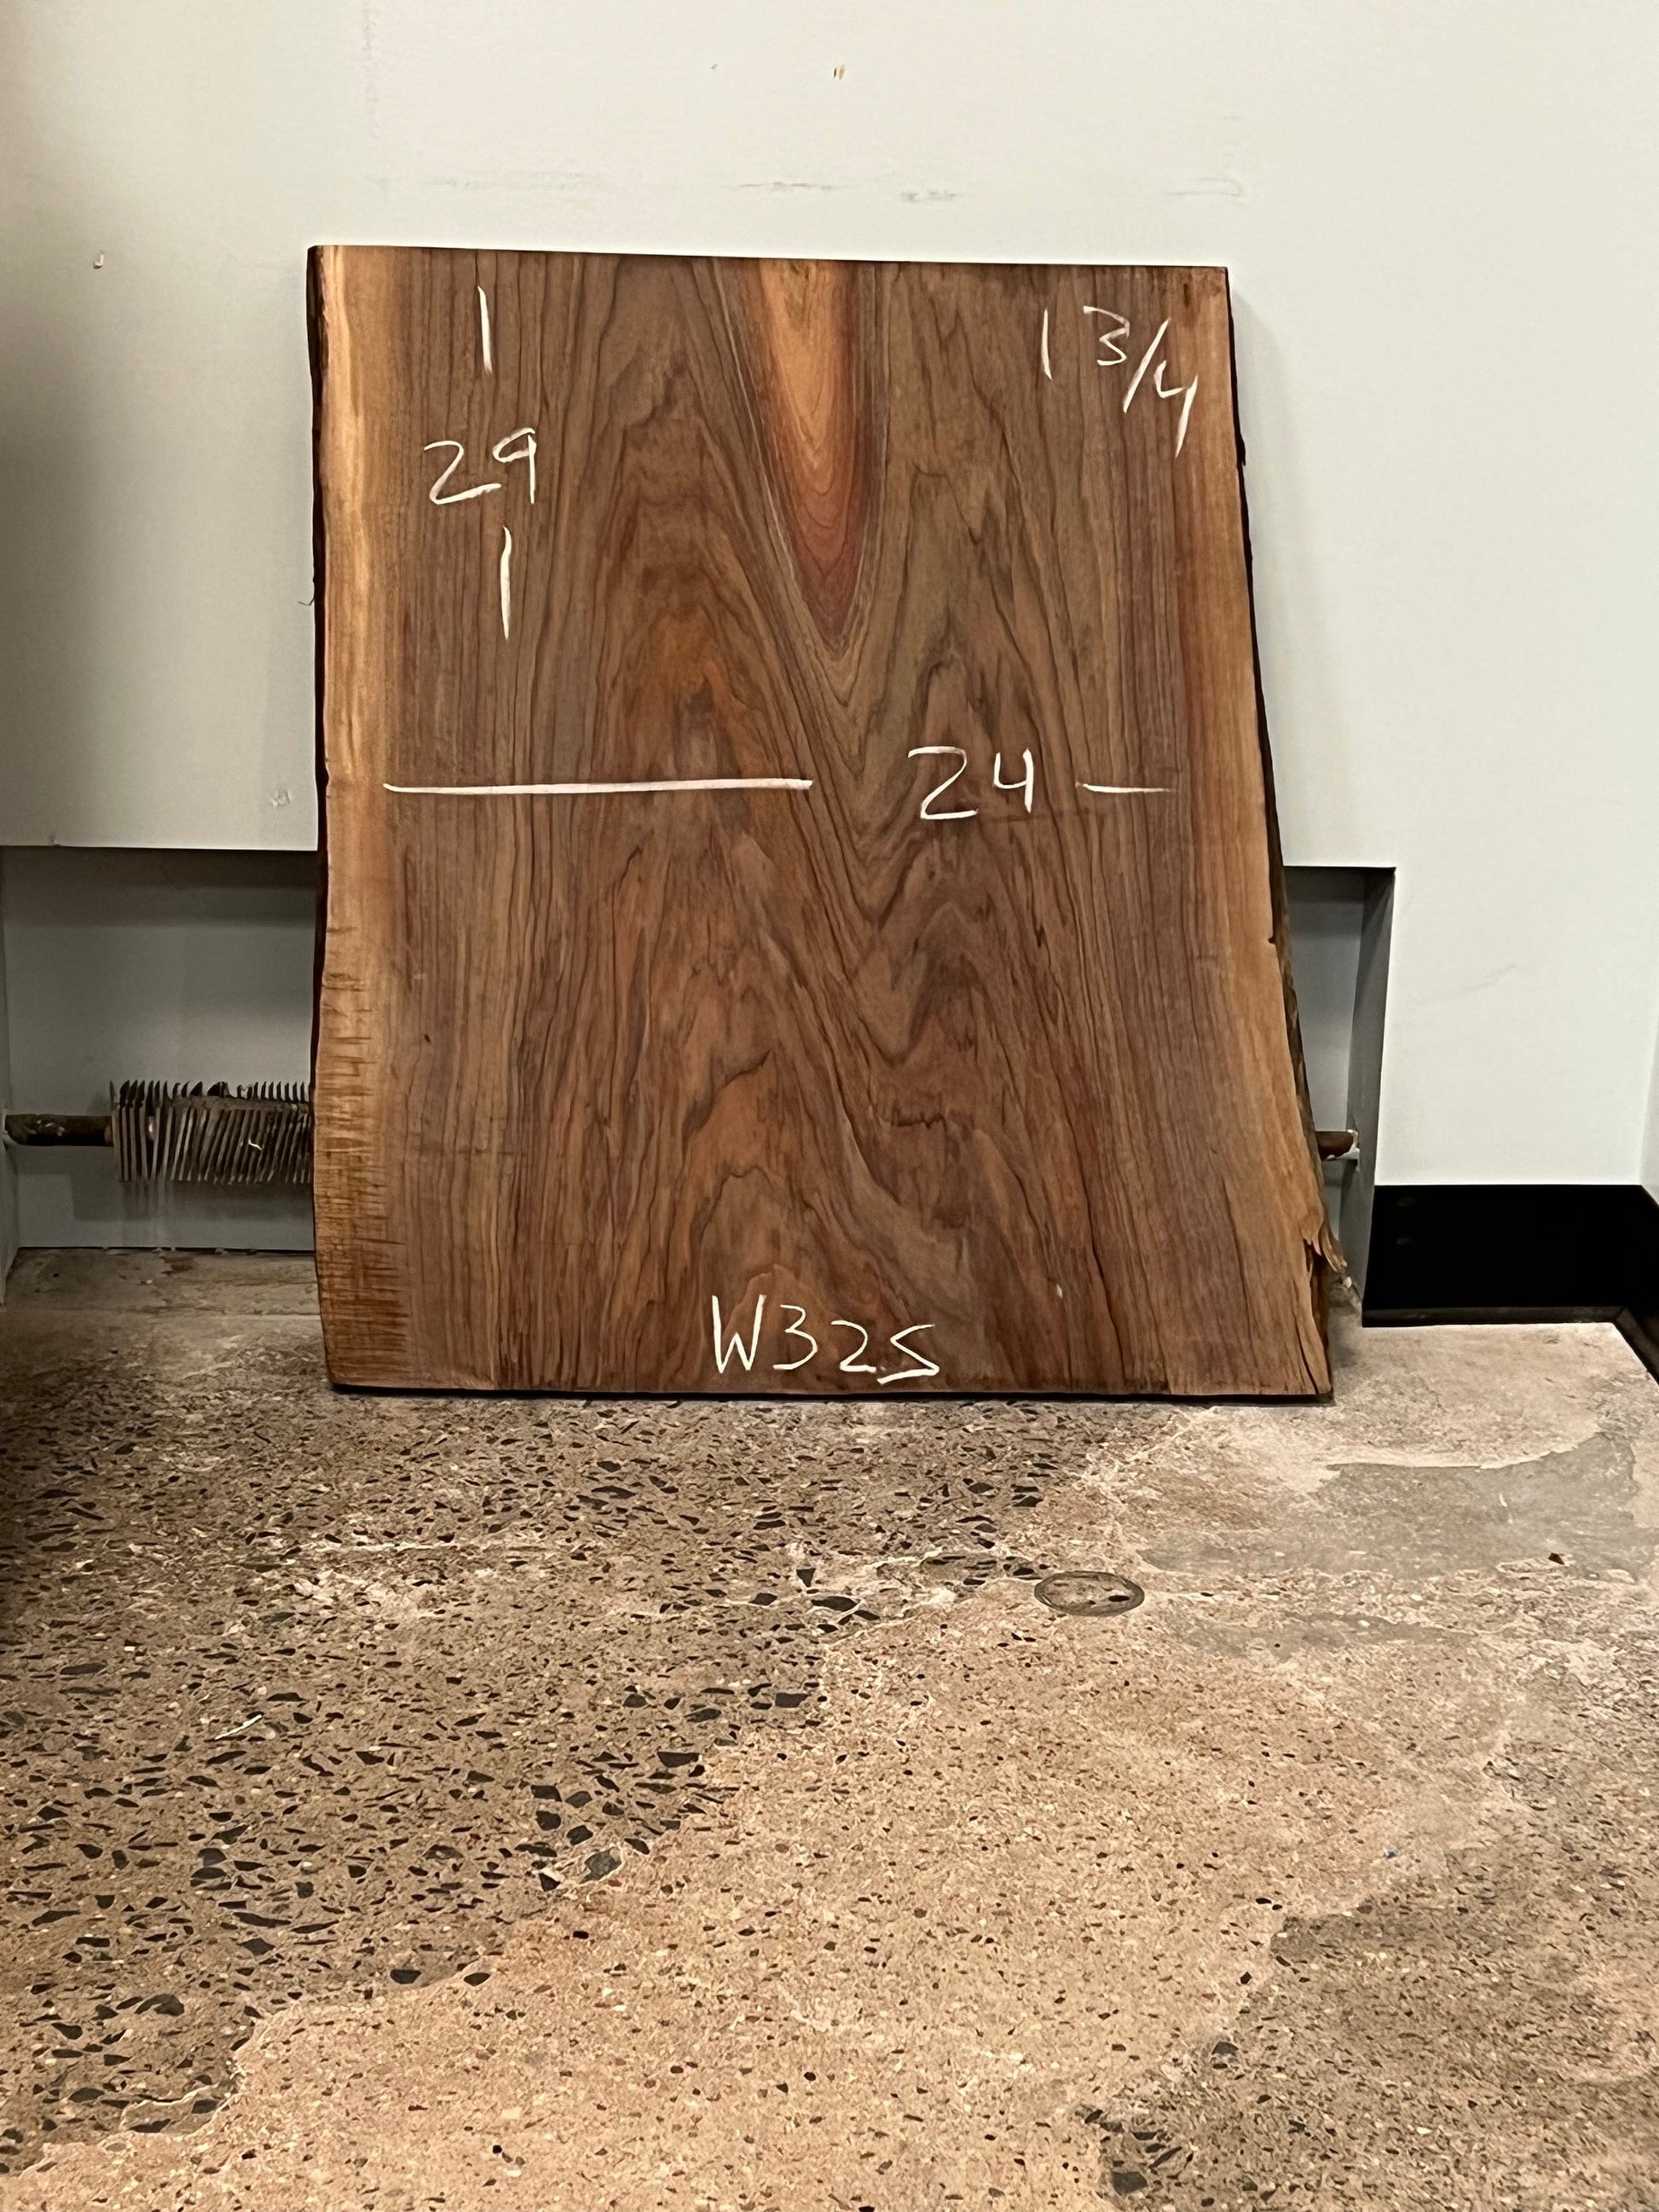 The Carpentry Shop Co., LLC Carpentry & Woodworking Project Plans 29" Walnut Slab